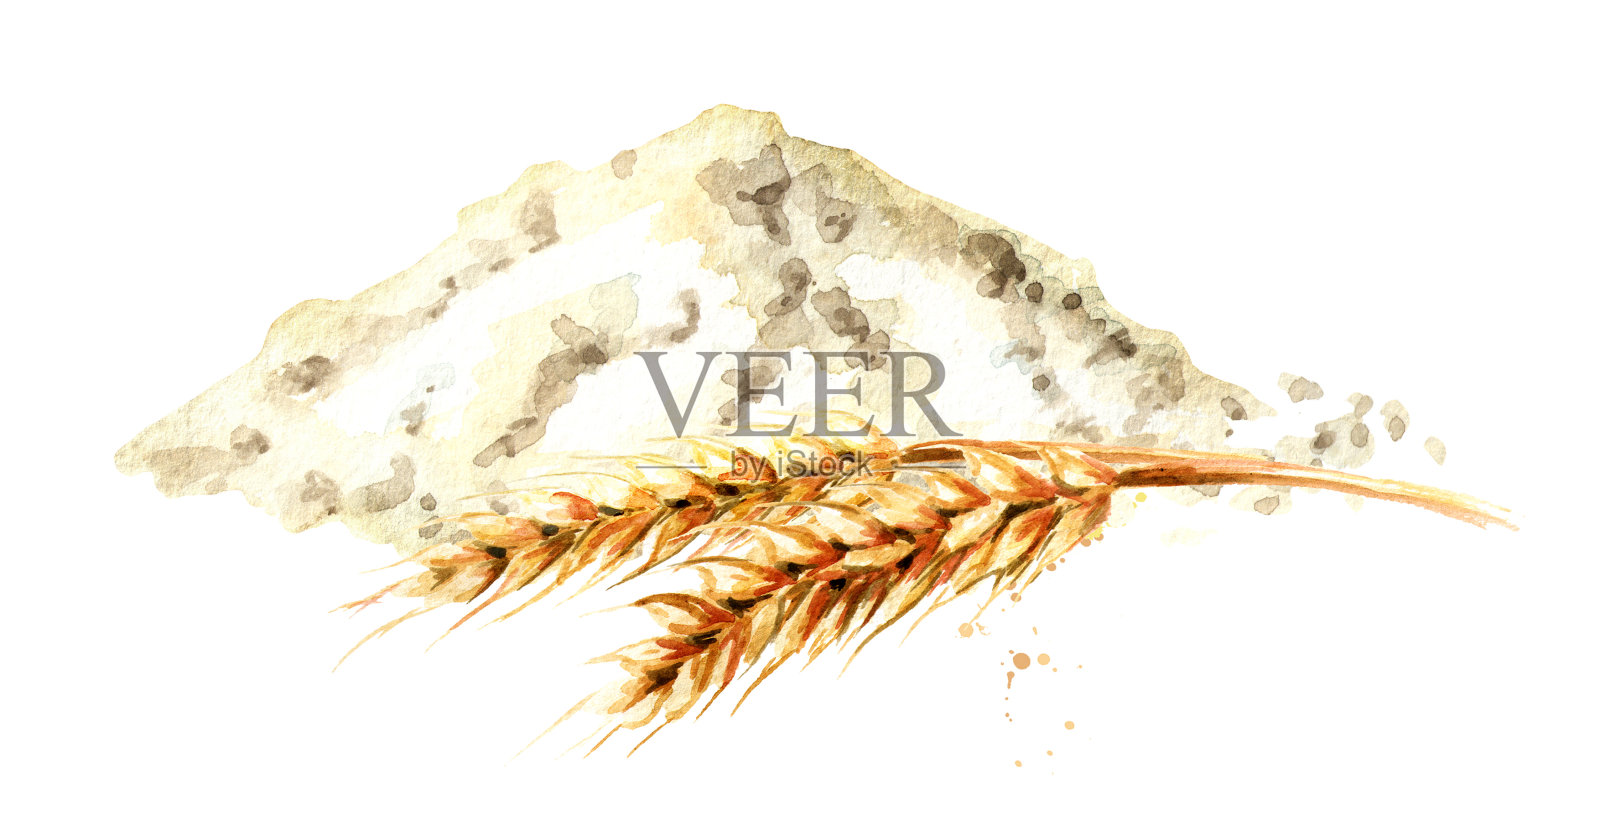 Wheat ear and handful of flour. Watercolor hand drawn illustration, isolated on white background插画图片素材